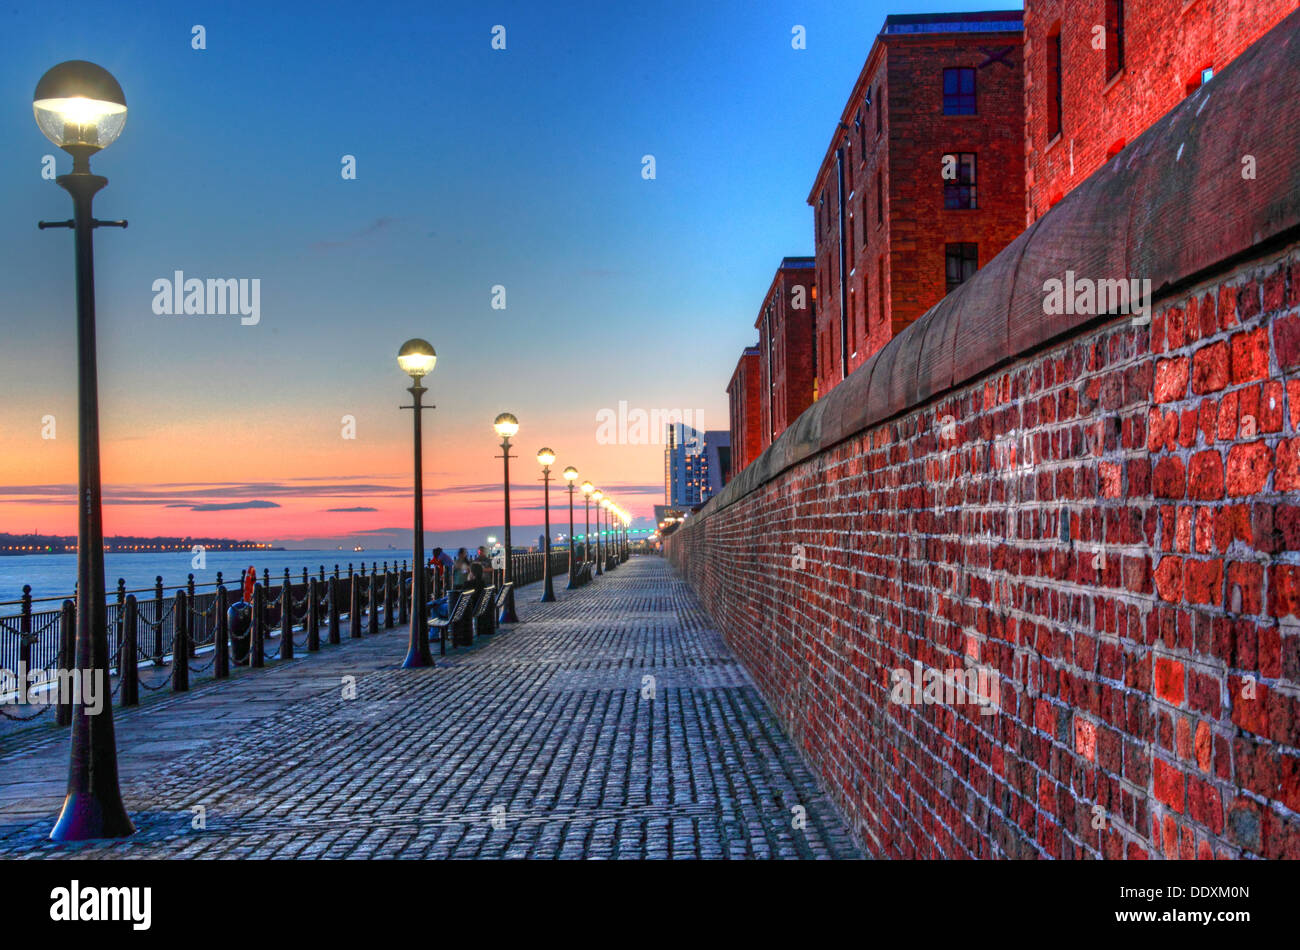 Looking down the Mersey from the Albert Dock at Nighttime liverpool Merseyside England UK Stock Photo